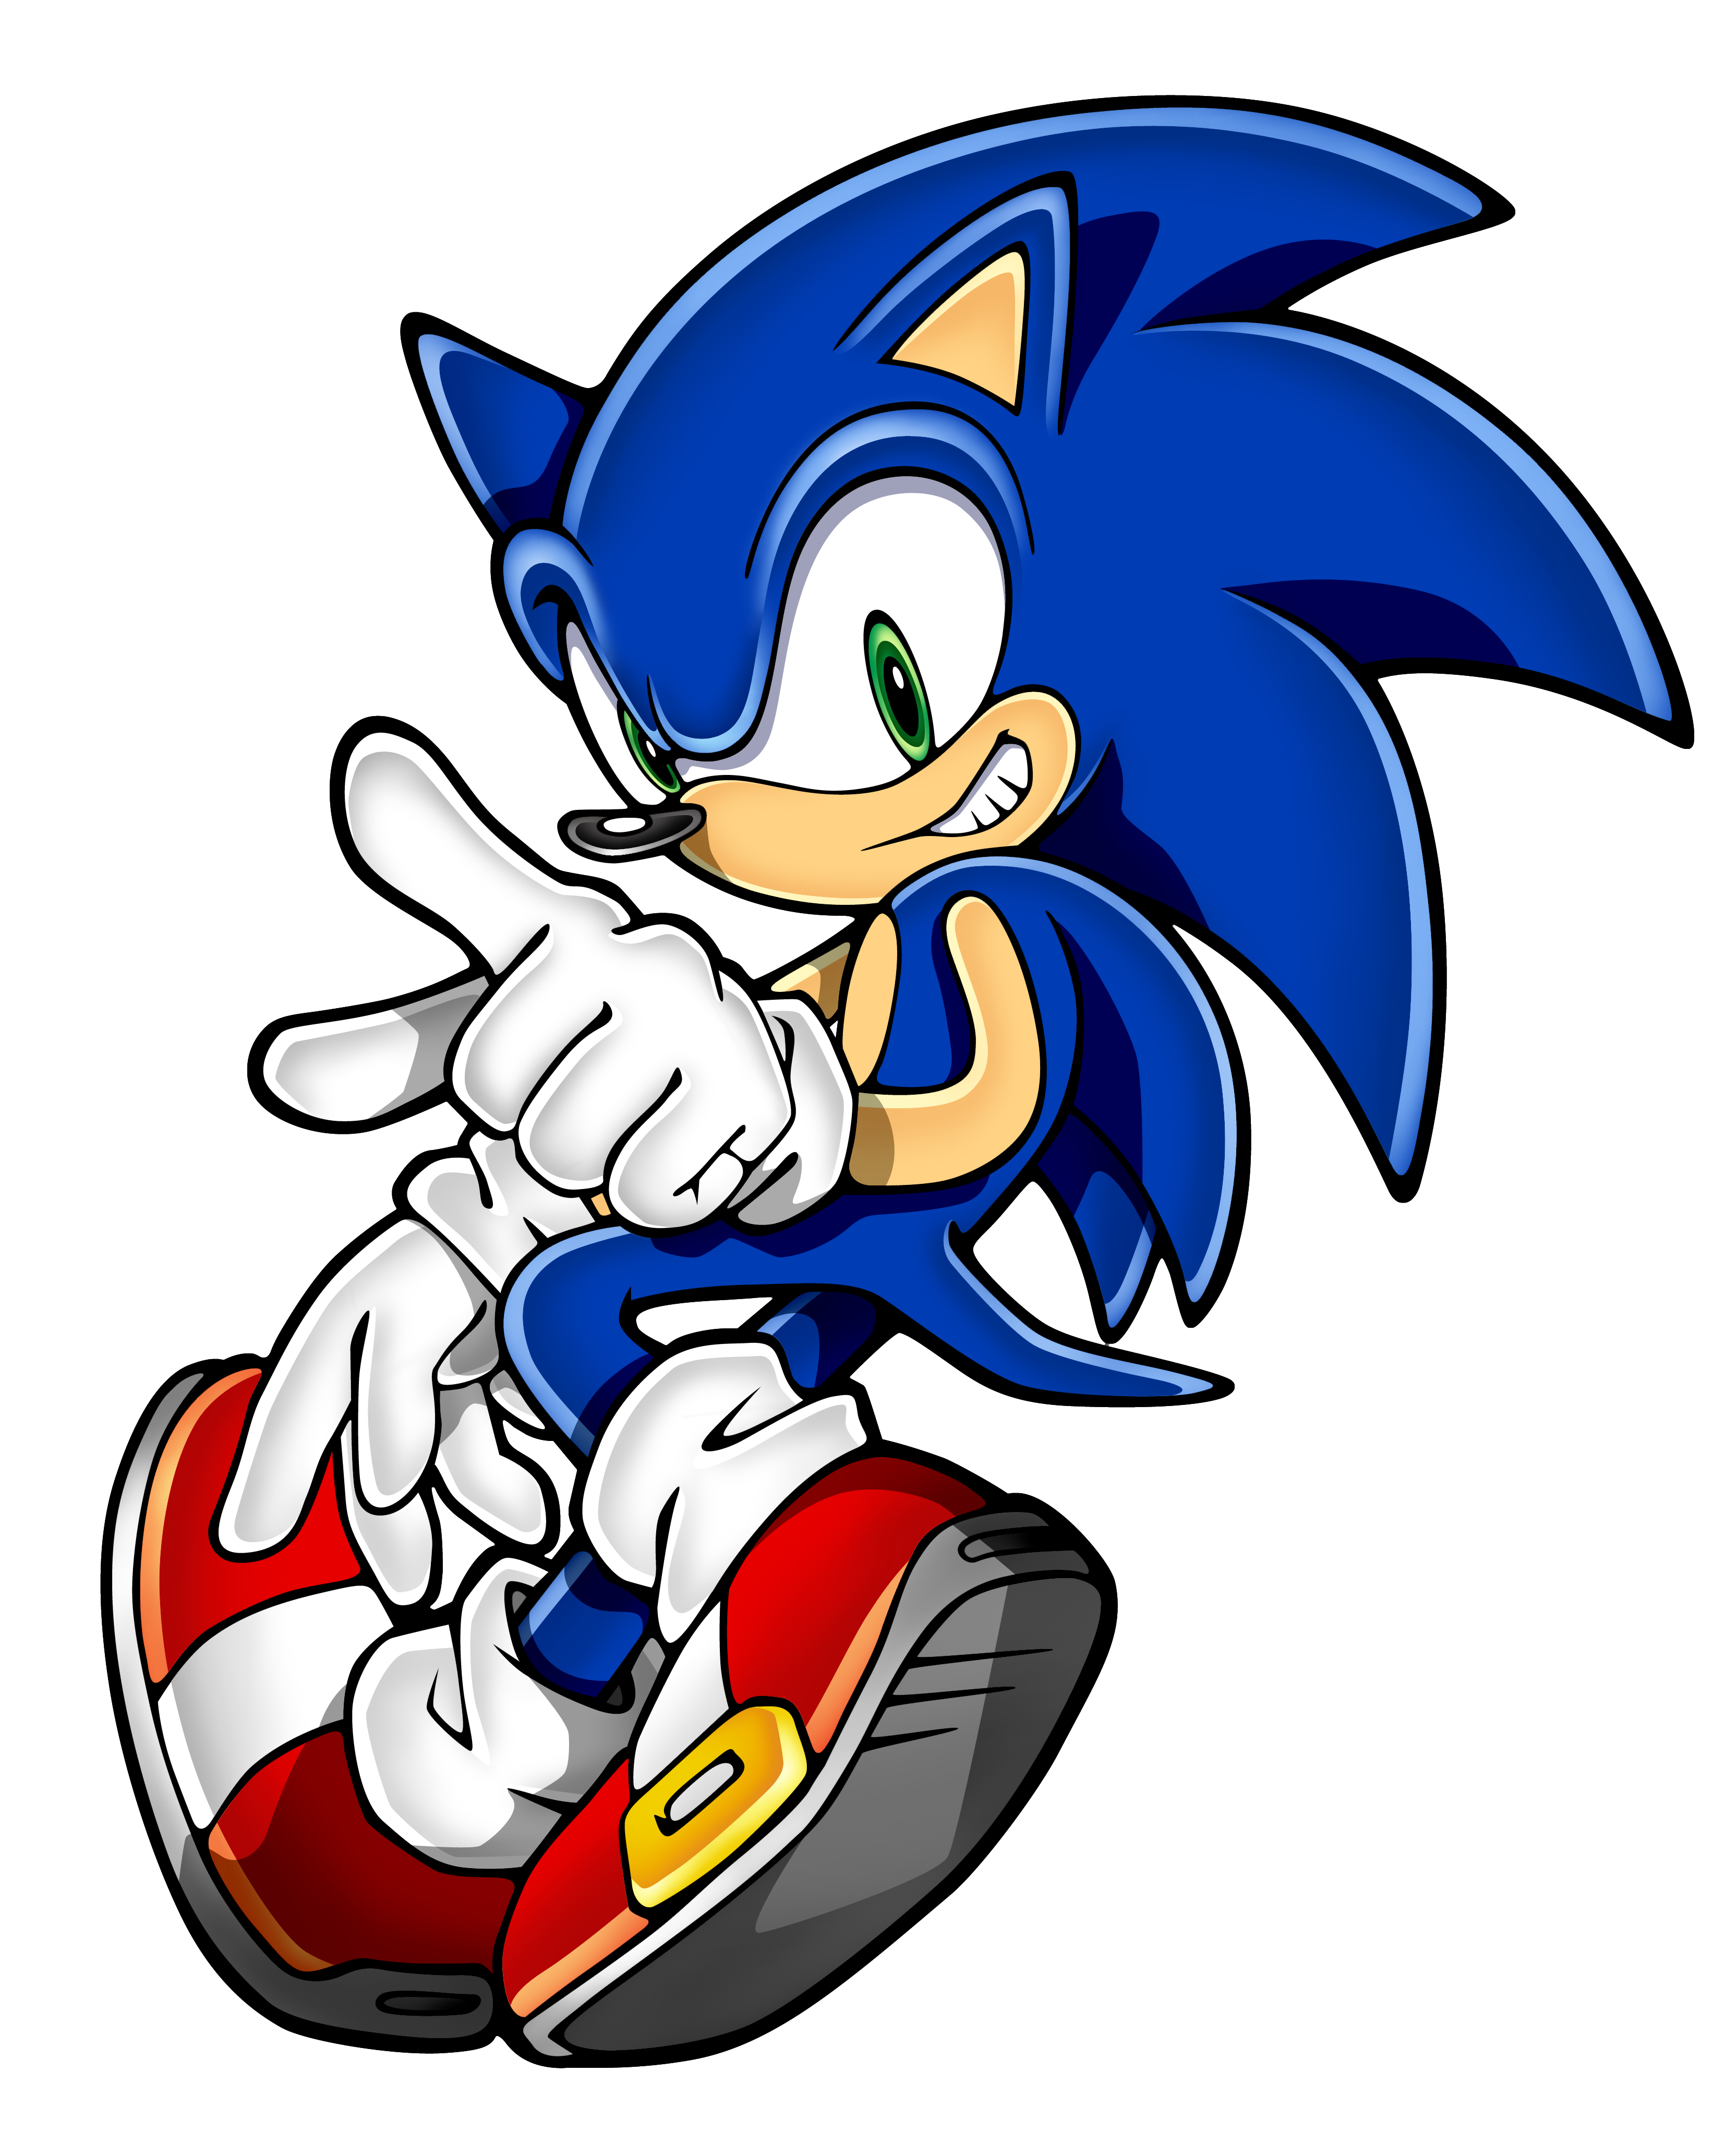 Sonic Adventure - Sonic the Hedgehog - Gallery - Sonic SCANF